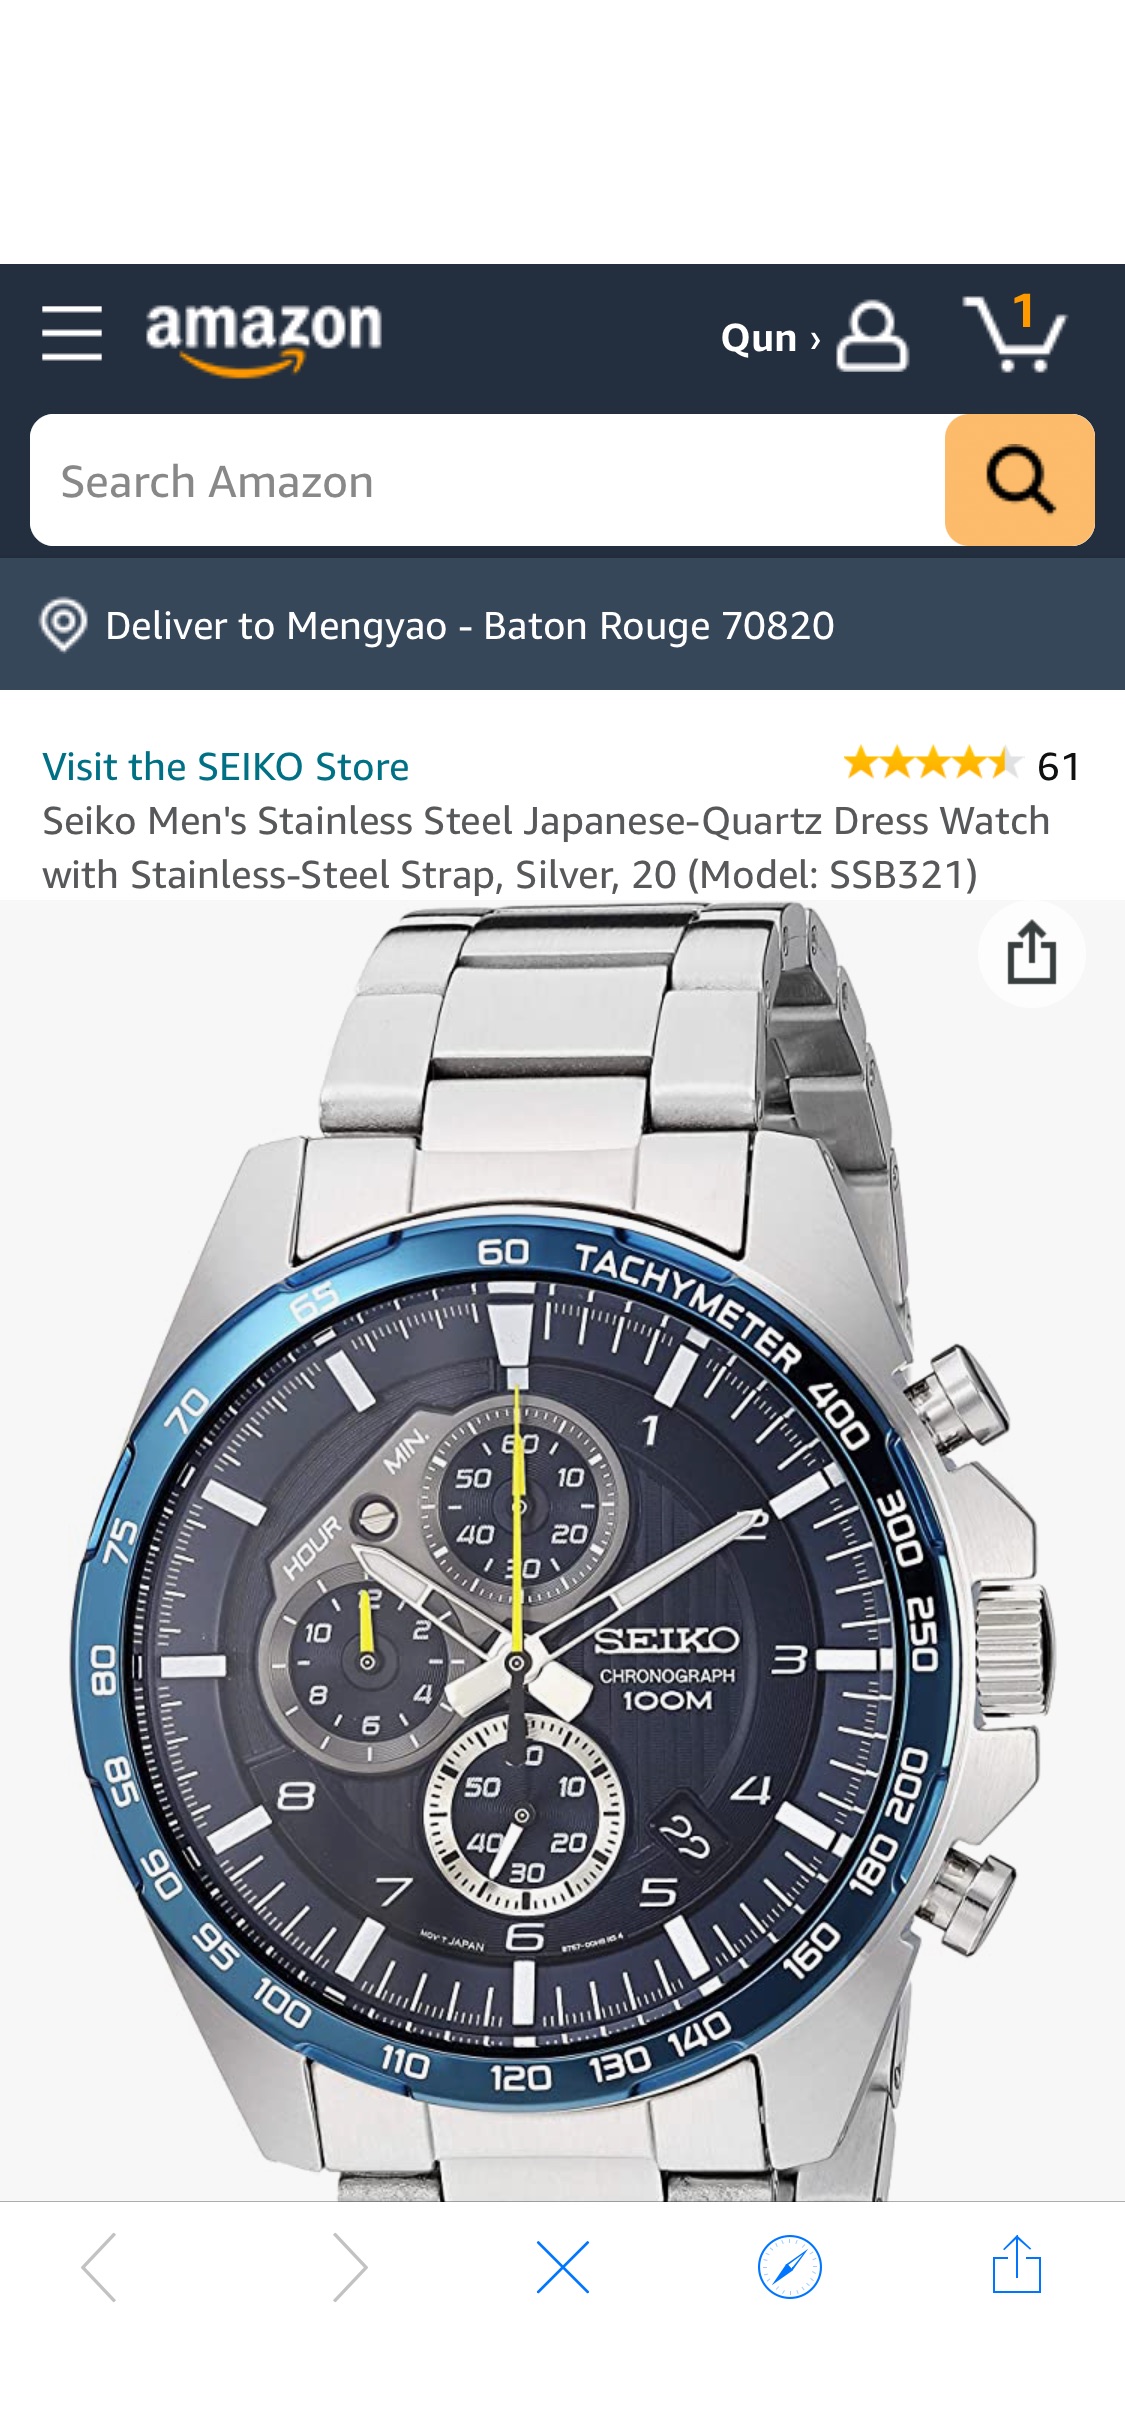 Amazon.com: Seiko Men's Stainless Steel Japanese-Quartz Dress Watch with Stainless-Steel Strap, Silver, 20 (Model: SSB321) : Clothing表, Shoes & Jewelry